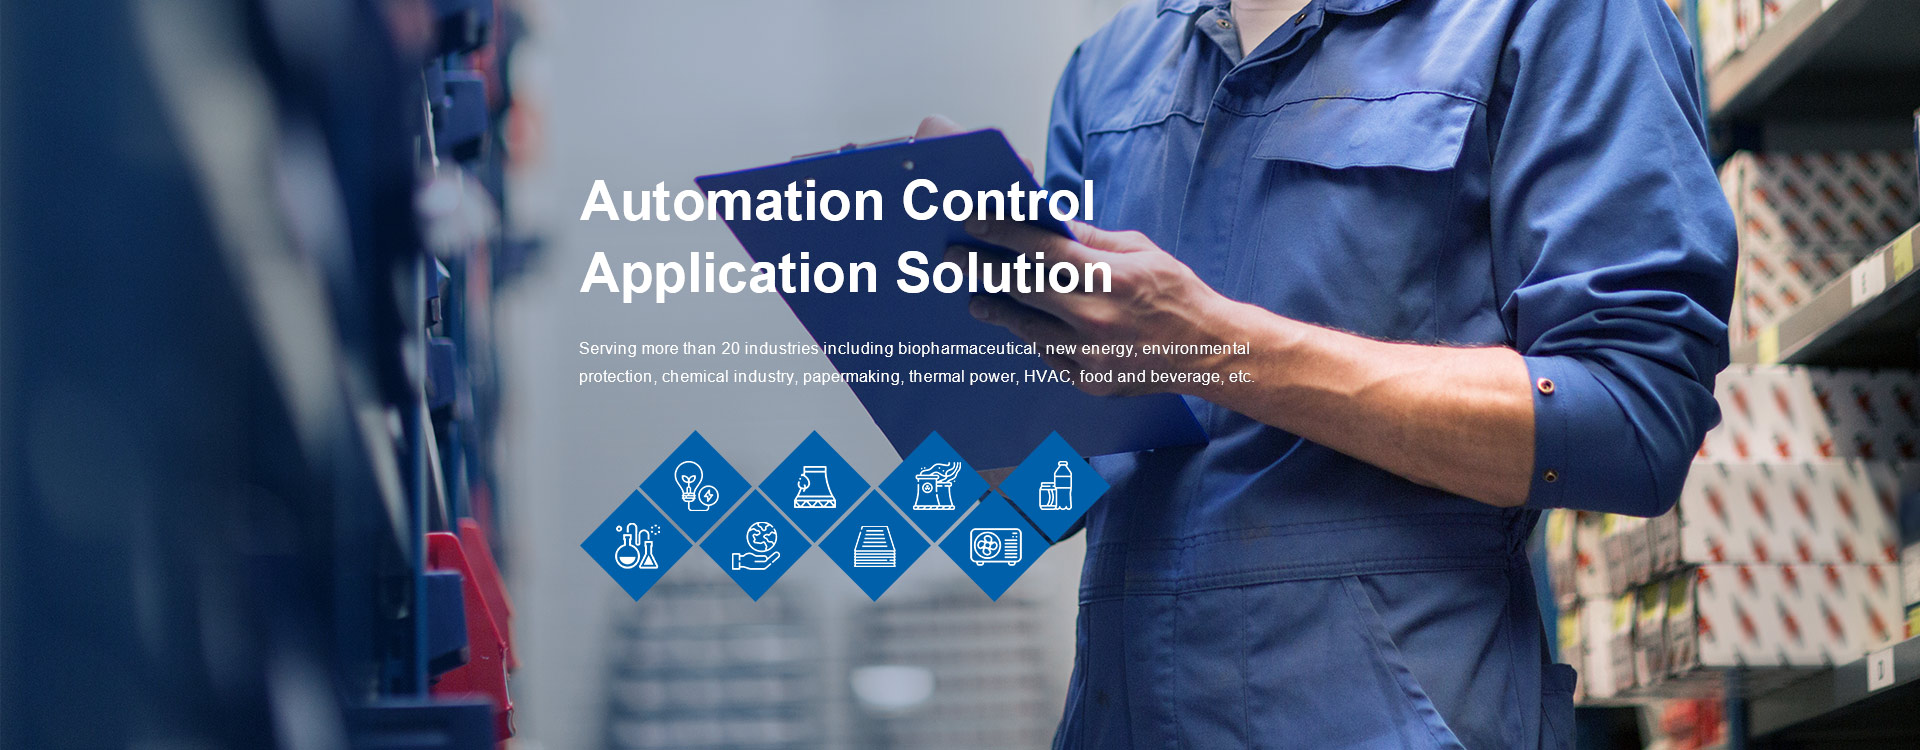 Automation Control Application Solution